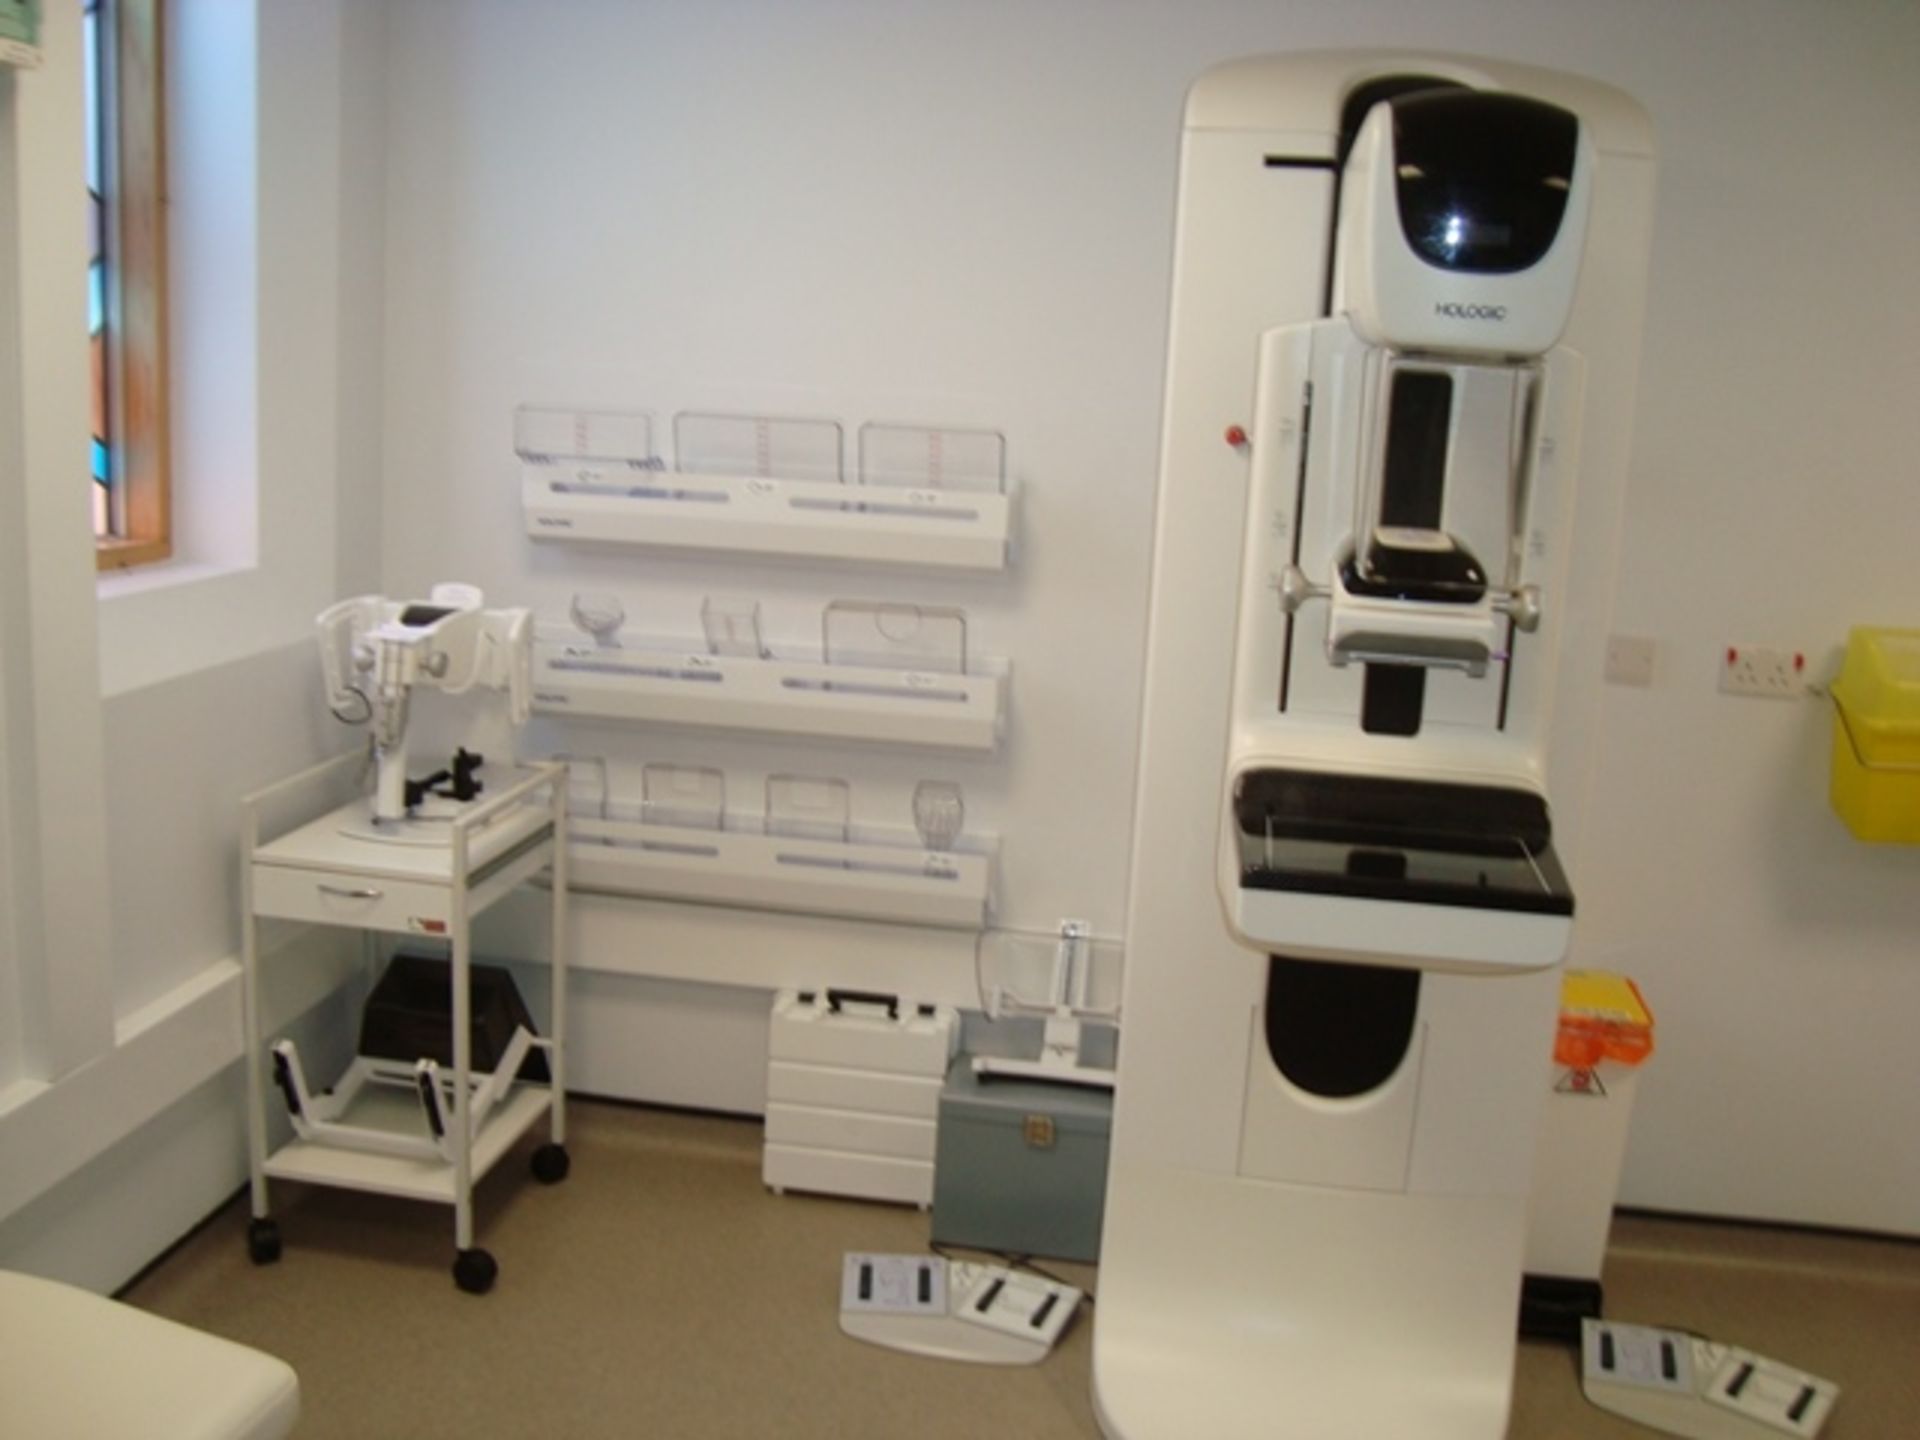 Selenia Dimensions Mammography System (2D/3D) including Securview-DX 400 and mammography chair